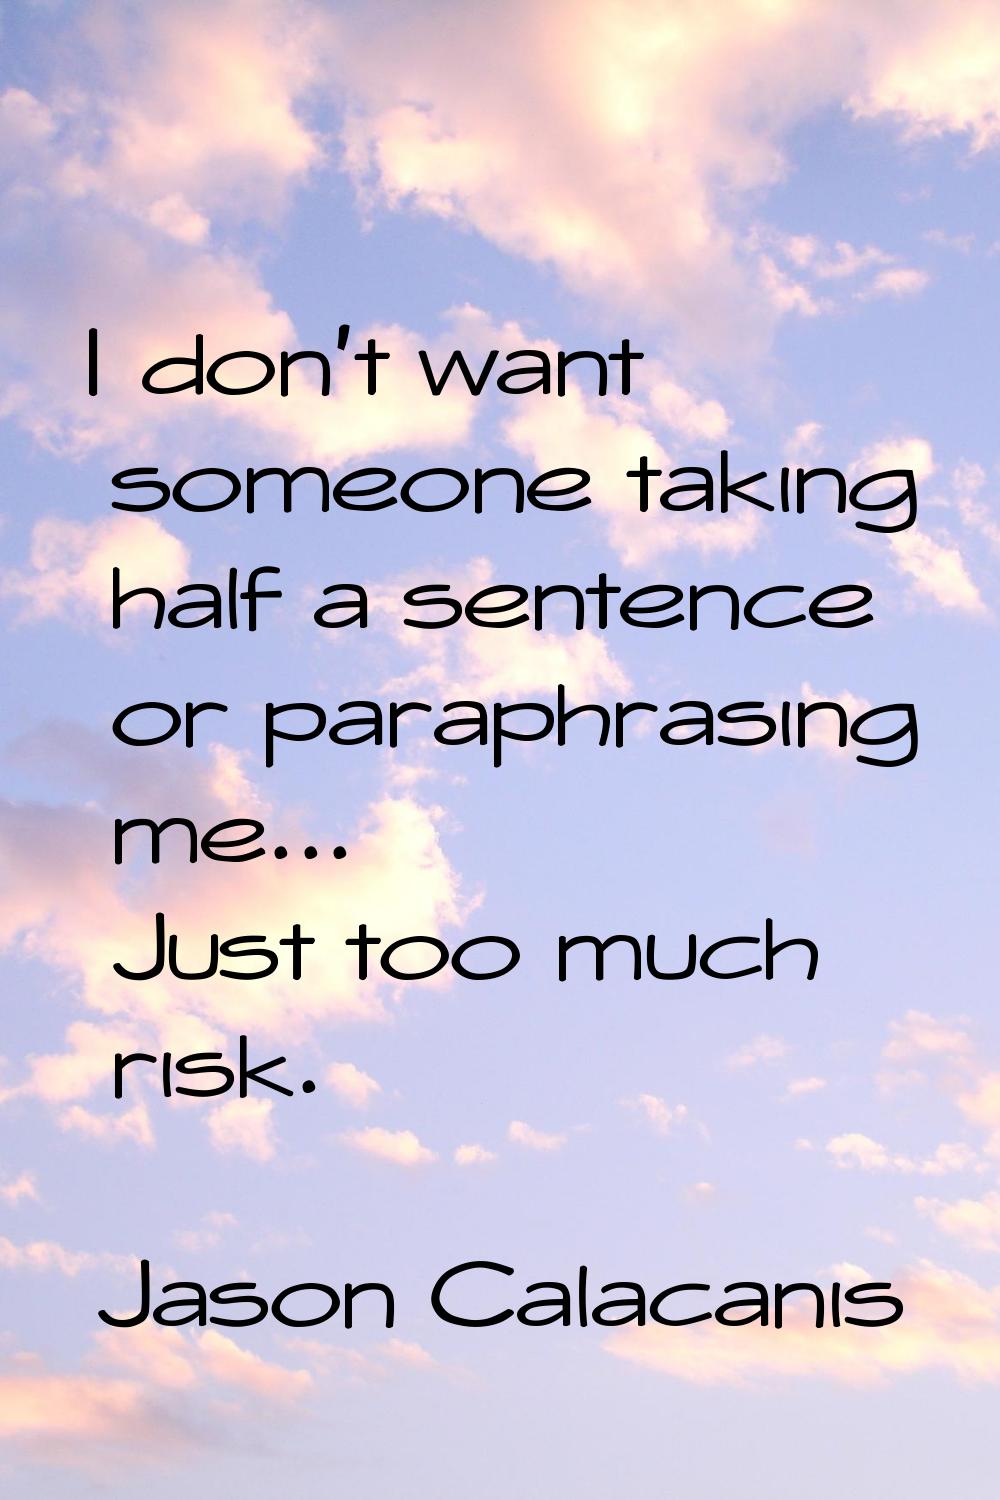 I don't want someone taking half a sentence or paraphrasing me... Just too much risk.